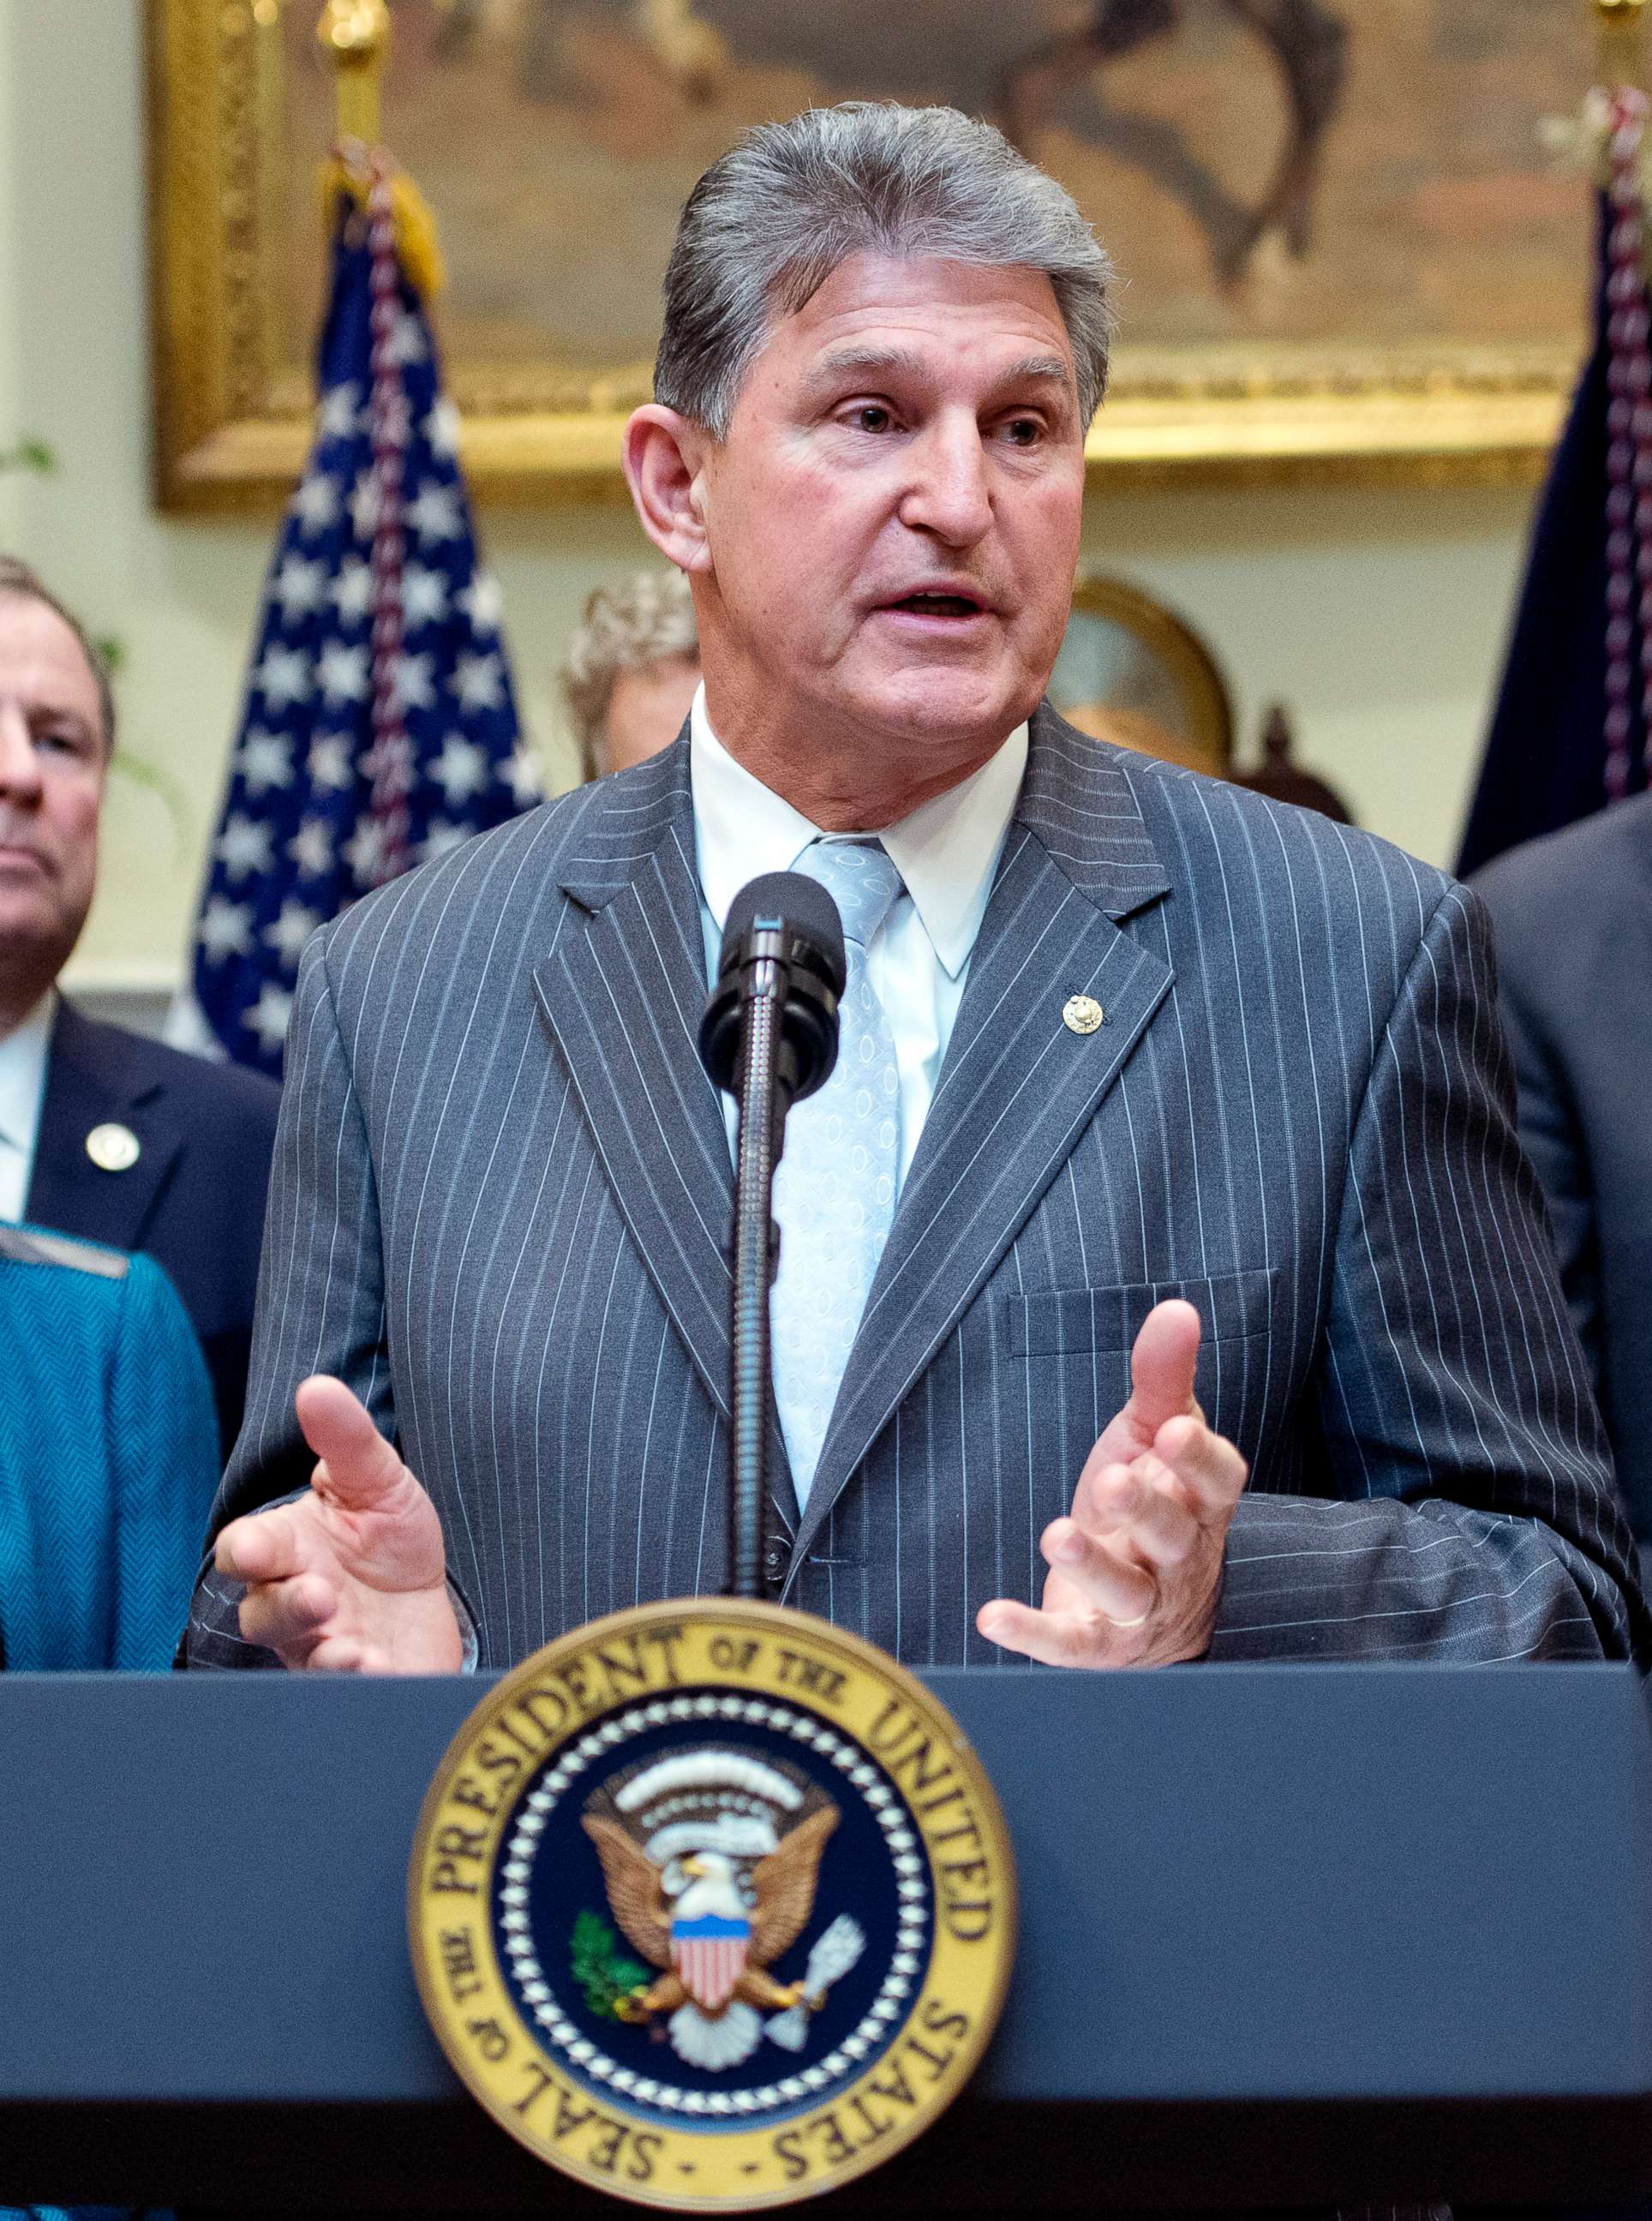 PHOTO: Senator Joe Manchin (D-WV) makes remarks prior to President Donald J. Trump signing H.J. Res. 38, disapproving the rule submitted by the US Department of the Interior known as the Stream Protection Rule in the White House, Feb. 16, 2017.